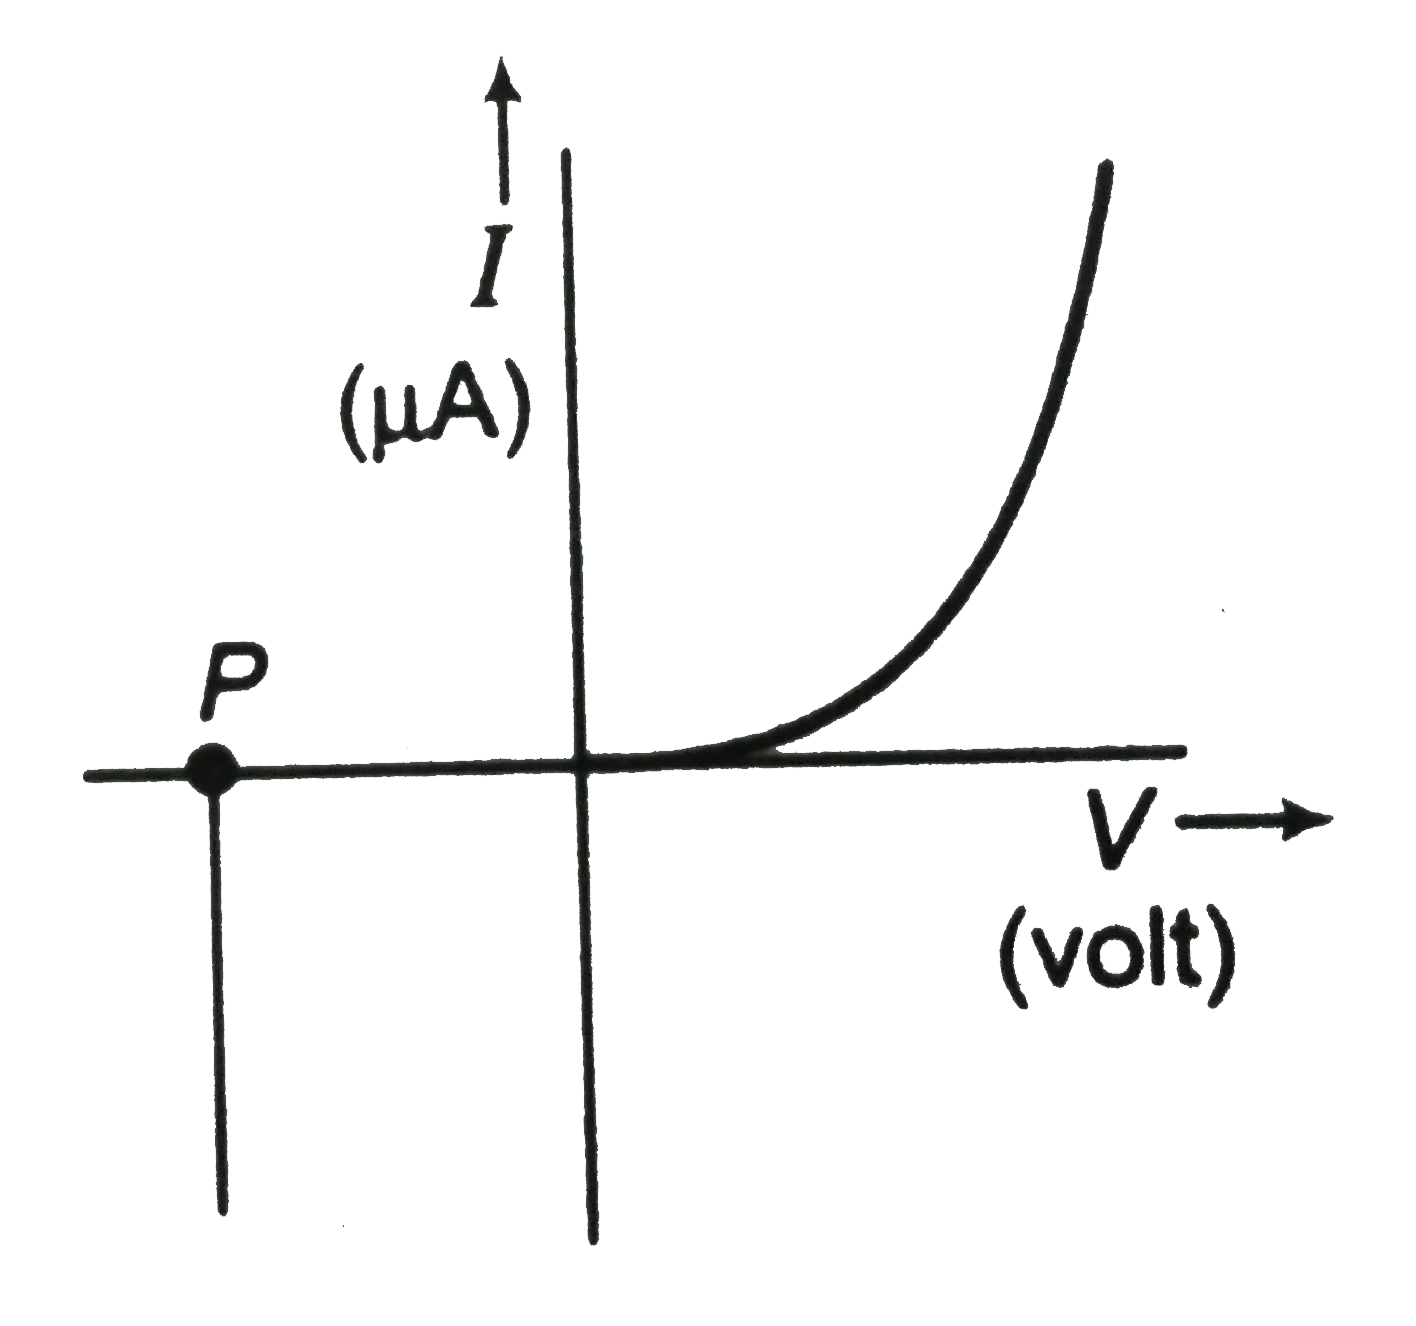 (i) Name the type of a diode whose characteristic are shown figure . (ii) What does the point P in Figure represent?